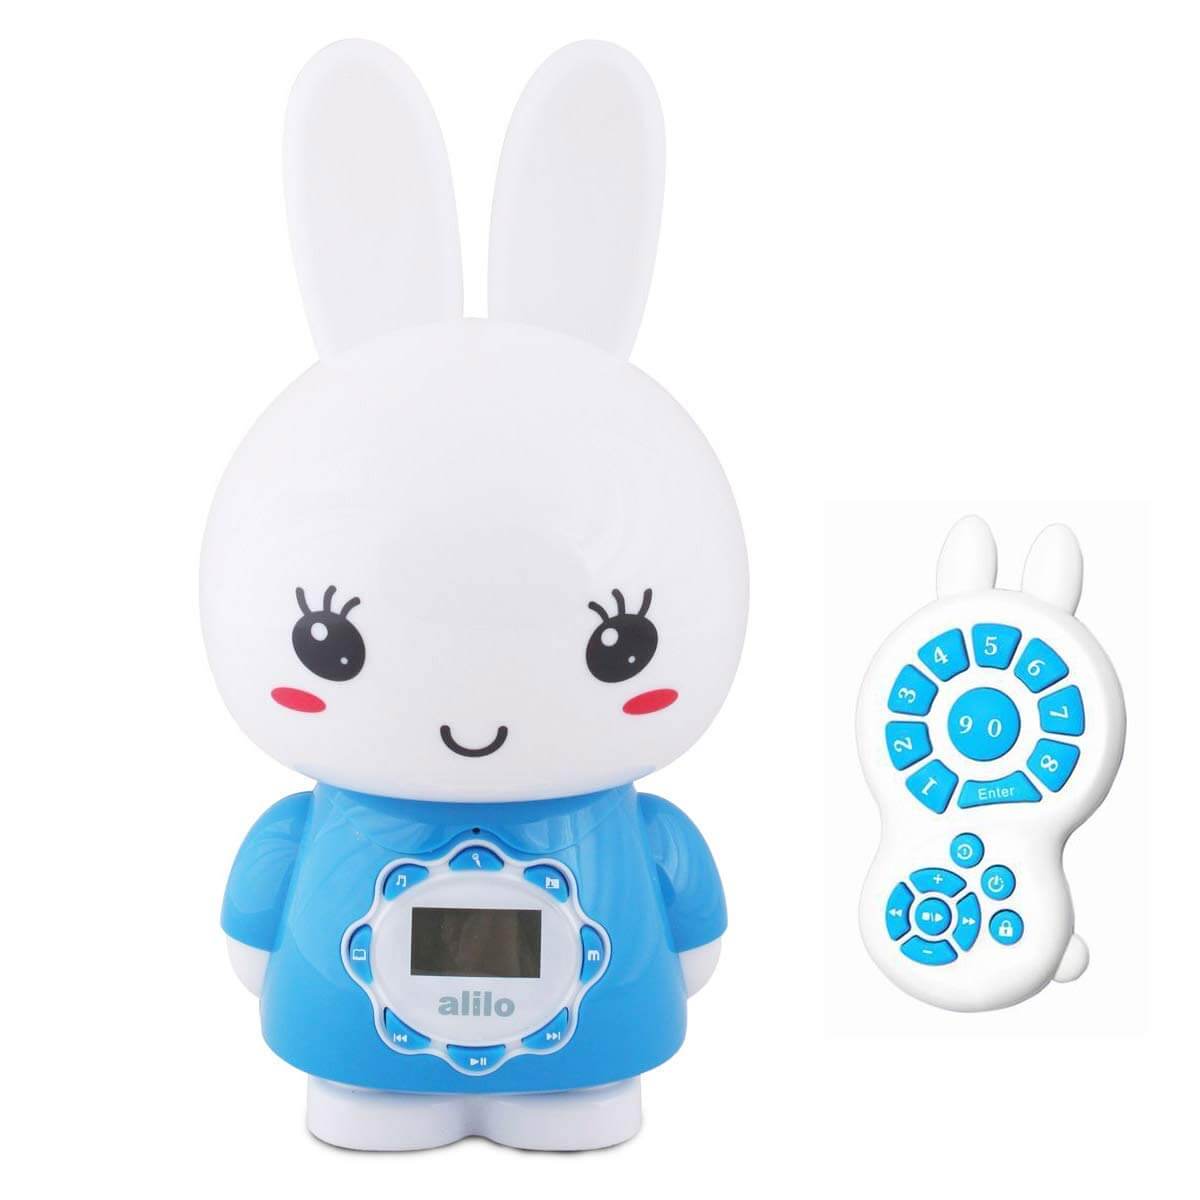 LCD Remote Control Azul Mp3 Player Selected Songs and Stories Included Alilo Big Bunny Media Player Edutainment for Your Child